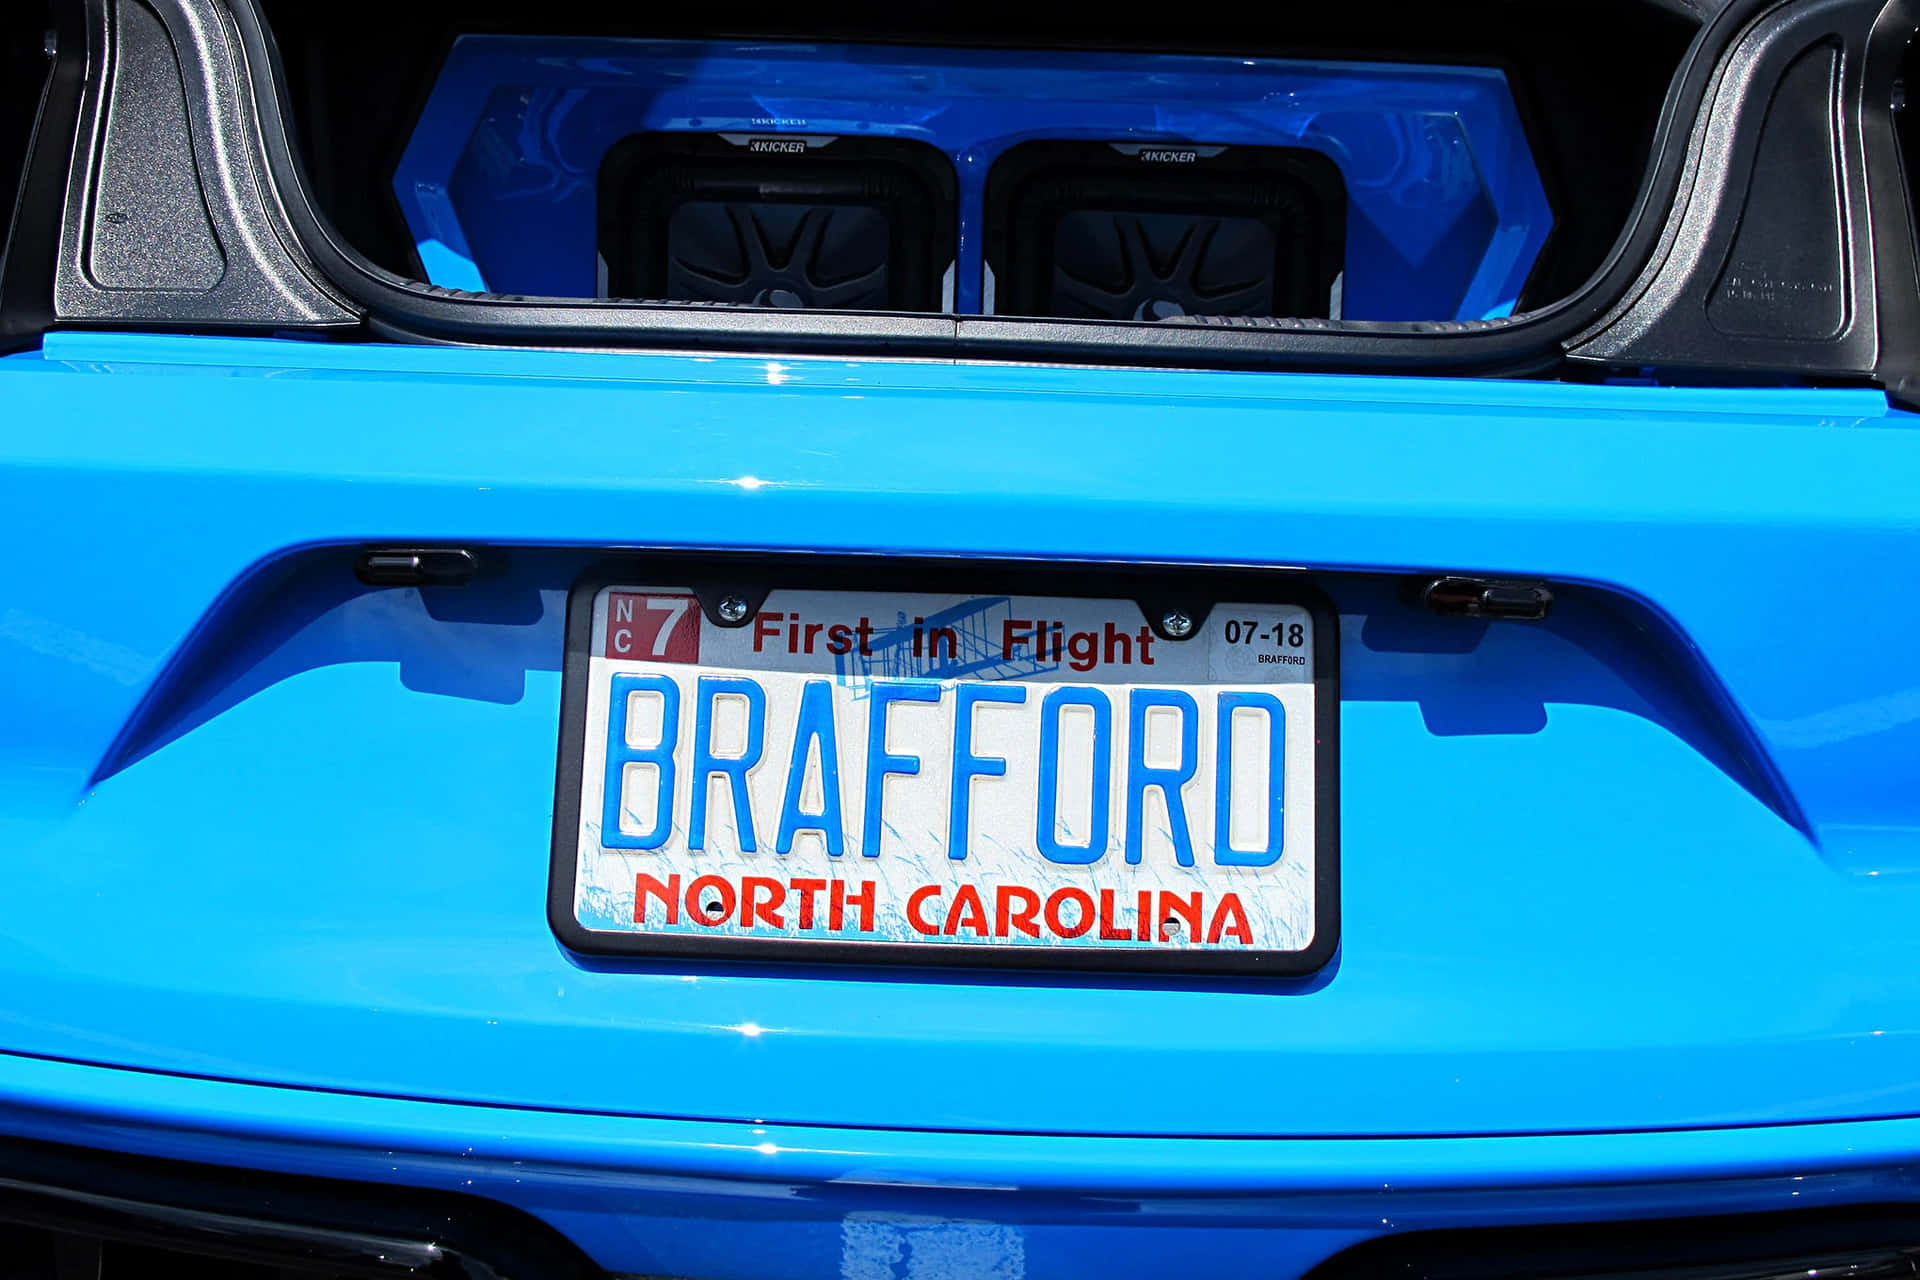 Car license. Georgia License Plate. Protect the Panther License Plate on the vehicle.